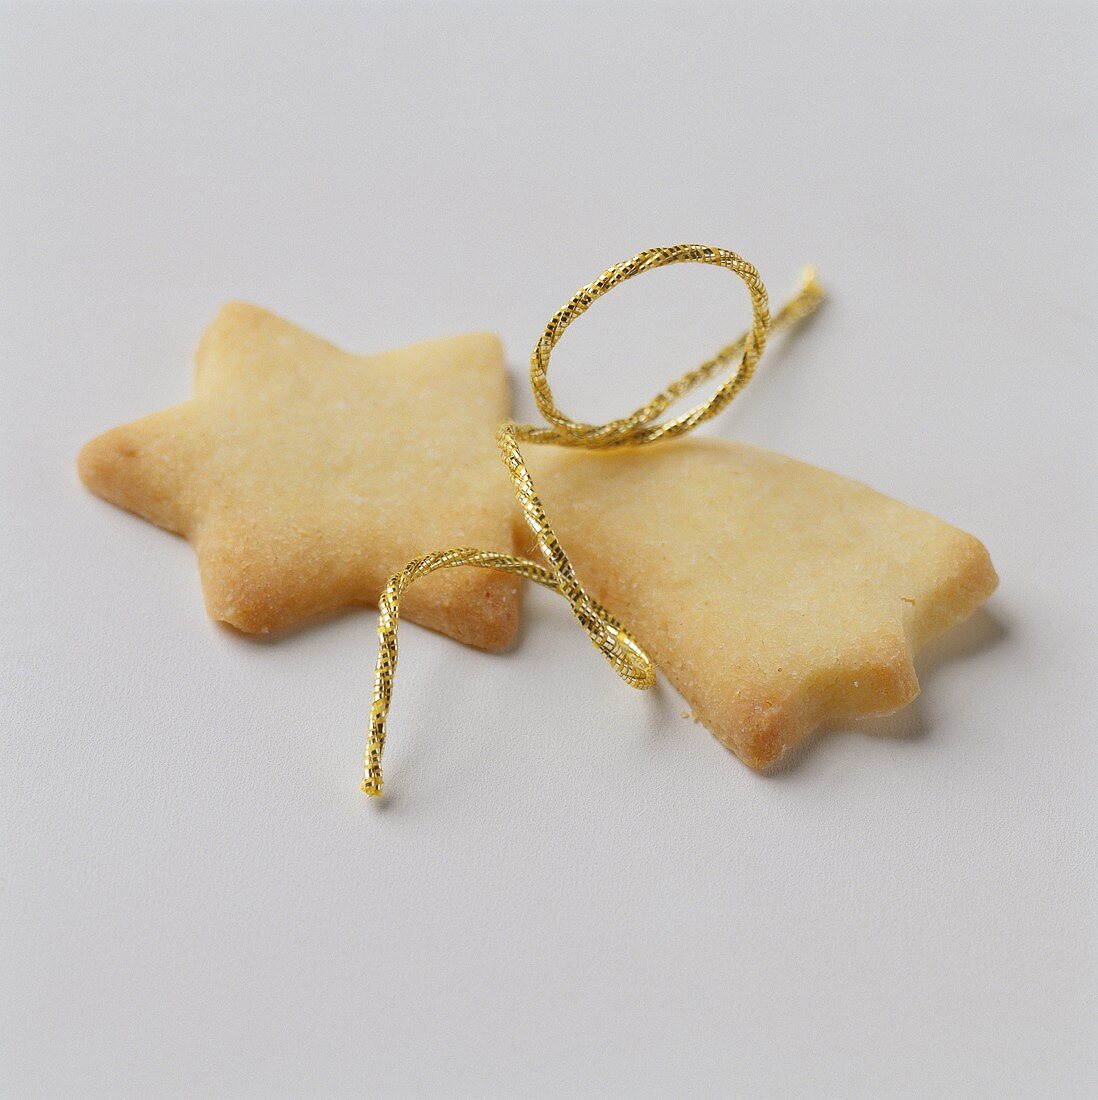 Star biscuits in sweet pastry